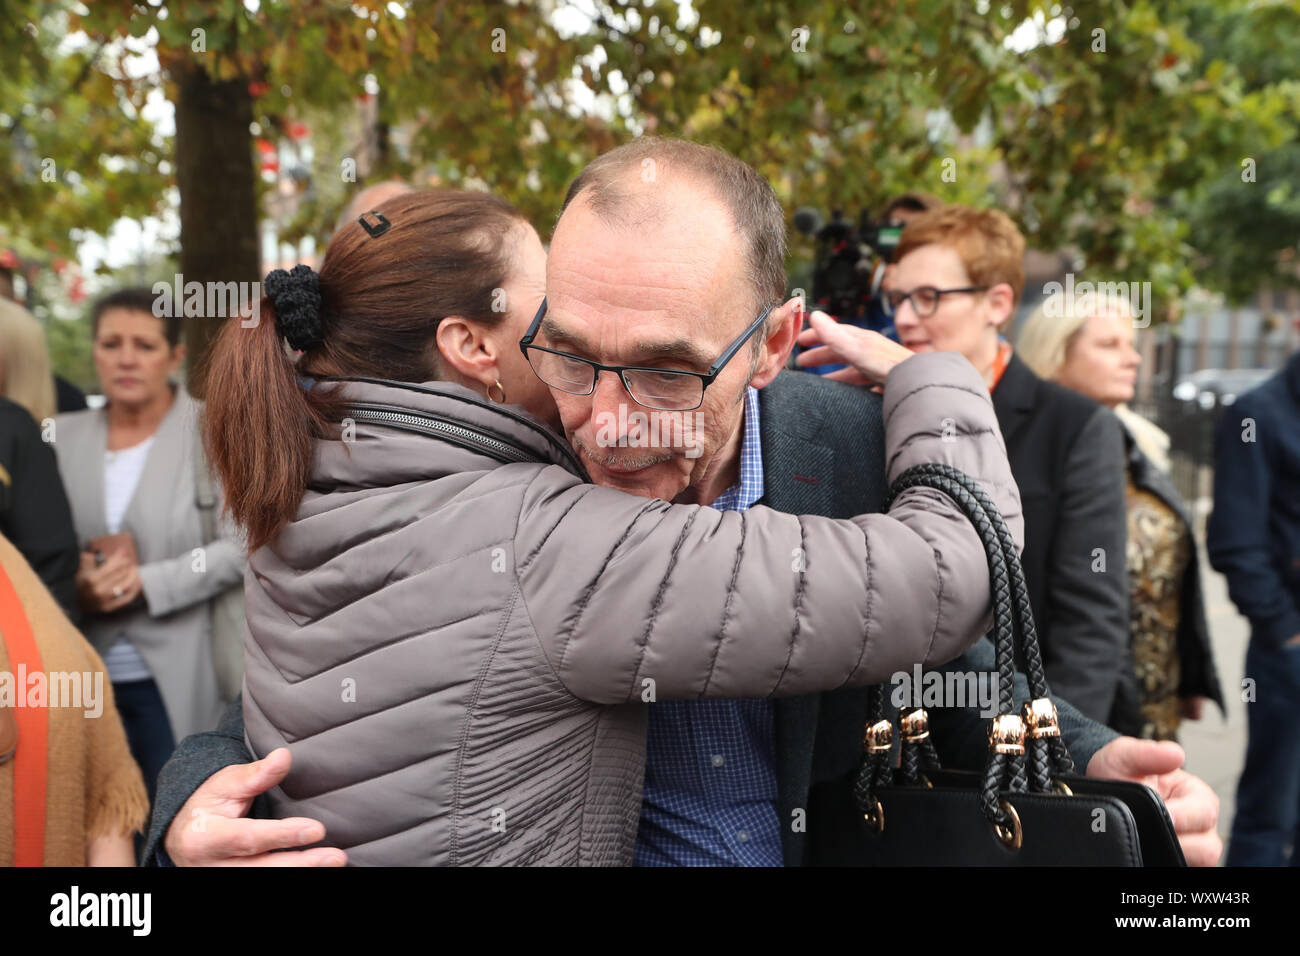 Liam Wray whose brother Jim was killed on Bloody Sunday, is hugged by another member of the Bloody Sunday families before walking to Londonderry Magistrates' Court, as the prosecution of a former soldier accused of two murders on Bloody Sunday will reach a courtroom for the first time. PA Photo. Picture date: Wednesday September 18, 2019. The case of Soldier F, who also faces five attempted murder charges in relation to the shootings in Londonderry on January 30 1972, has been listed for hearing before a district judge in Derry Magistrates' Court. See PA story ULSTER Sunday. Photo credit Stock Photo